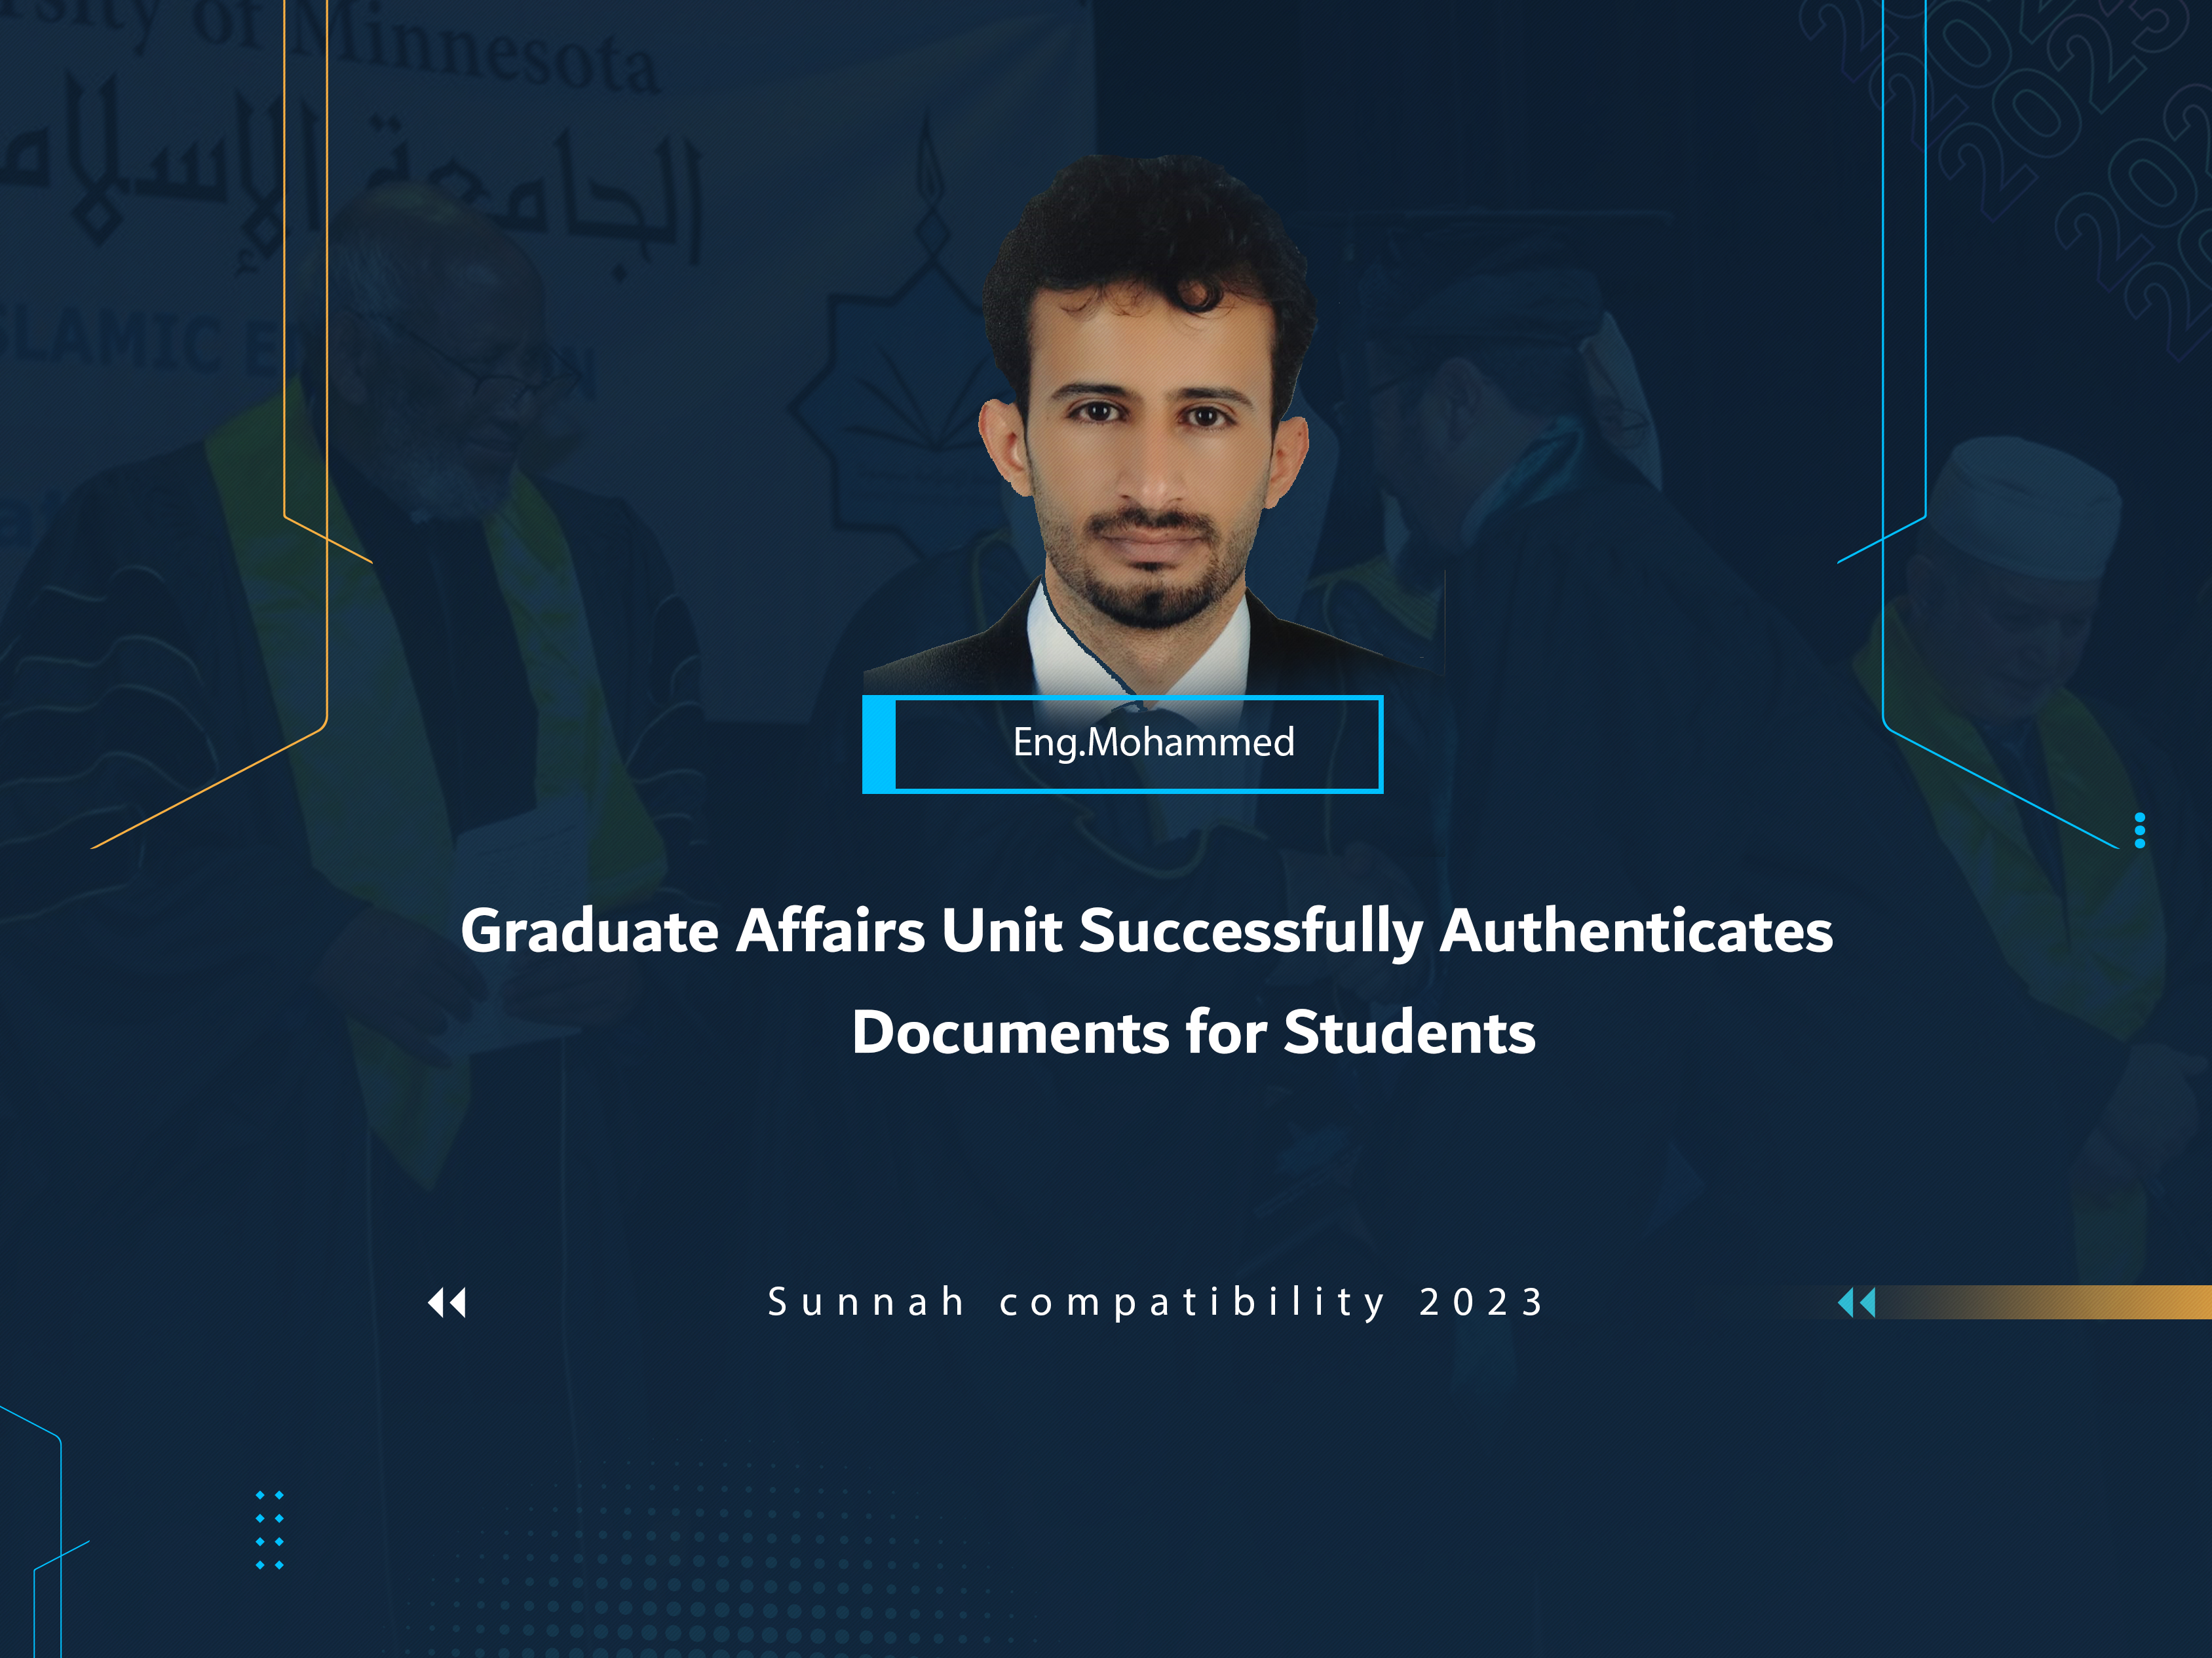 Graduate Affairs Unit Successfully Authenticates Documents for Students